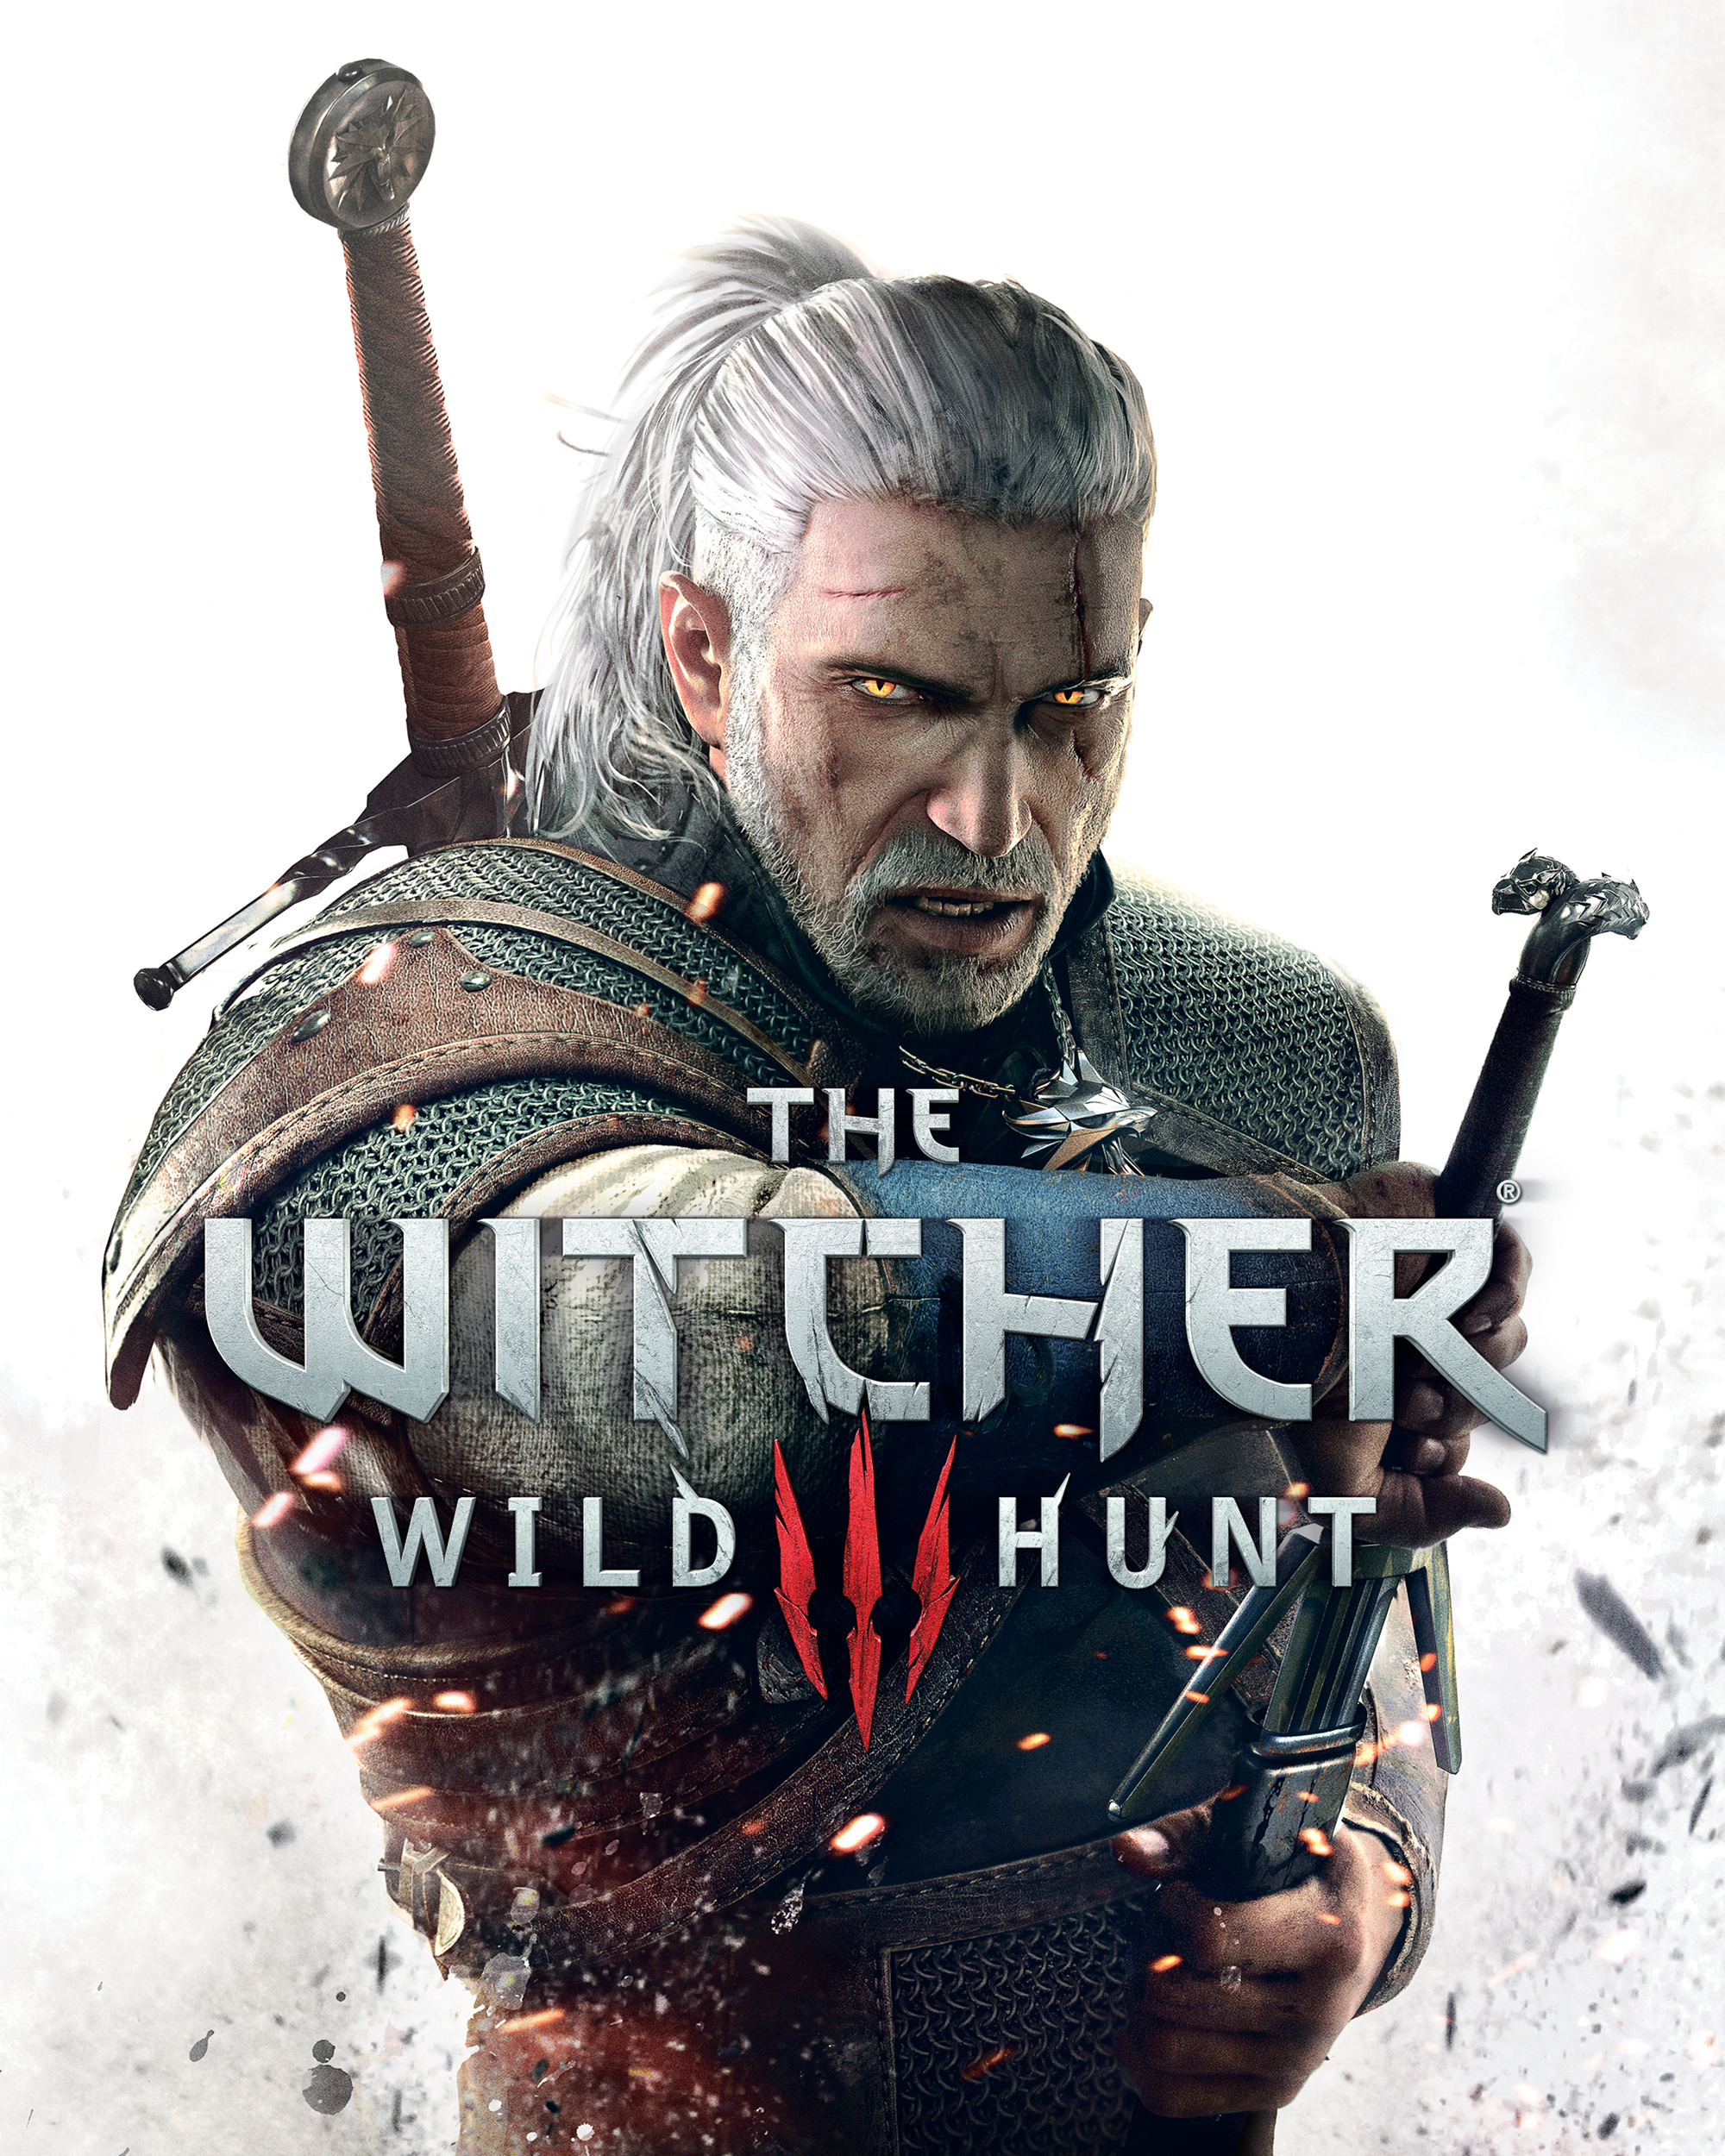 The Witcher 3: Wild Hunt Video Game Box Art - ID: 173509 - Image Abyss
